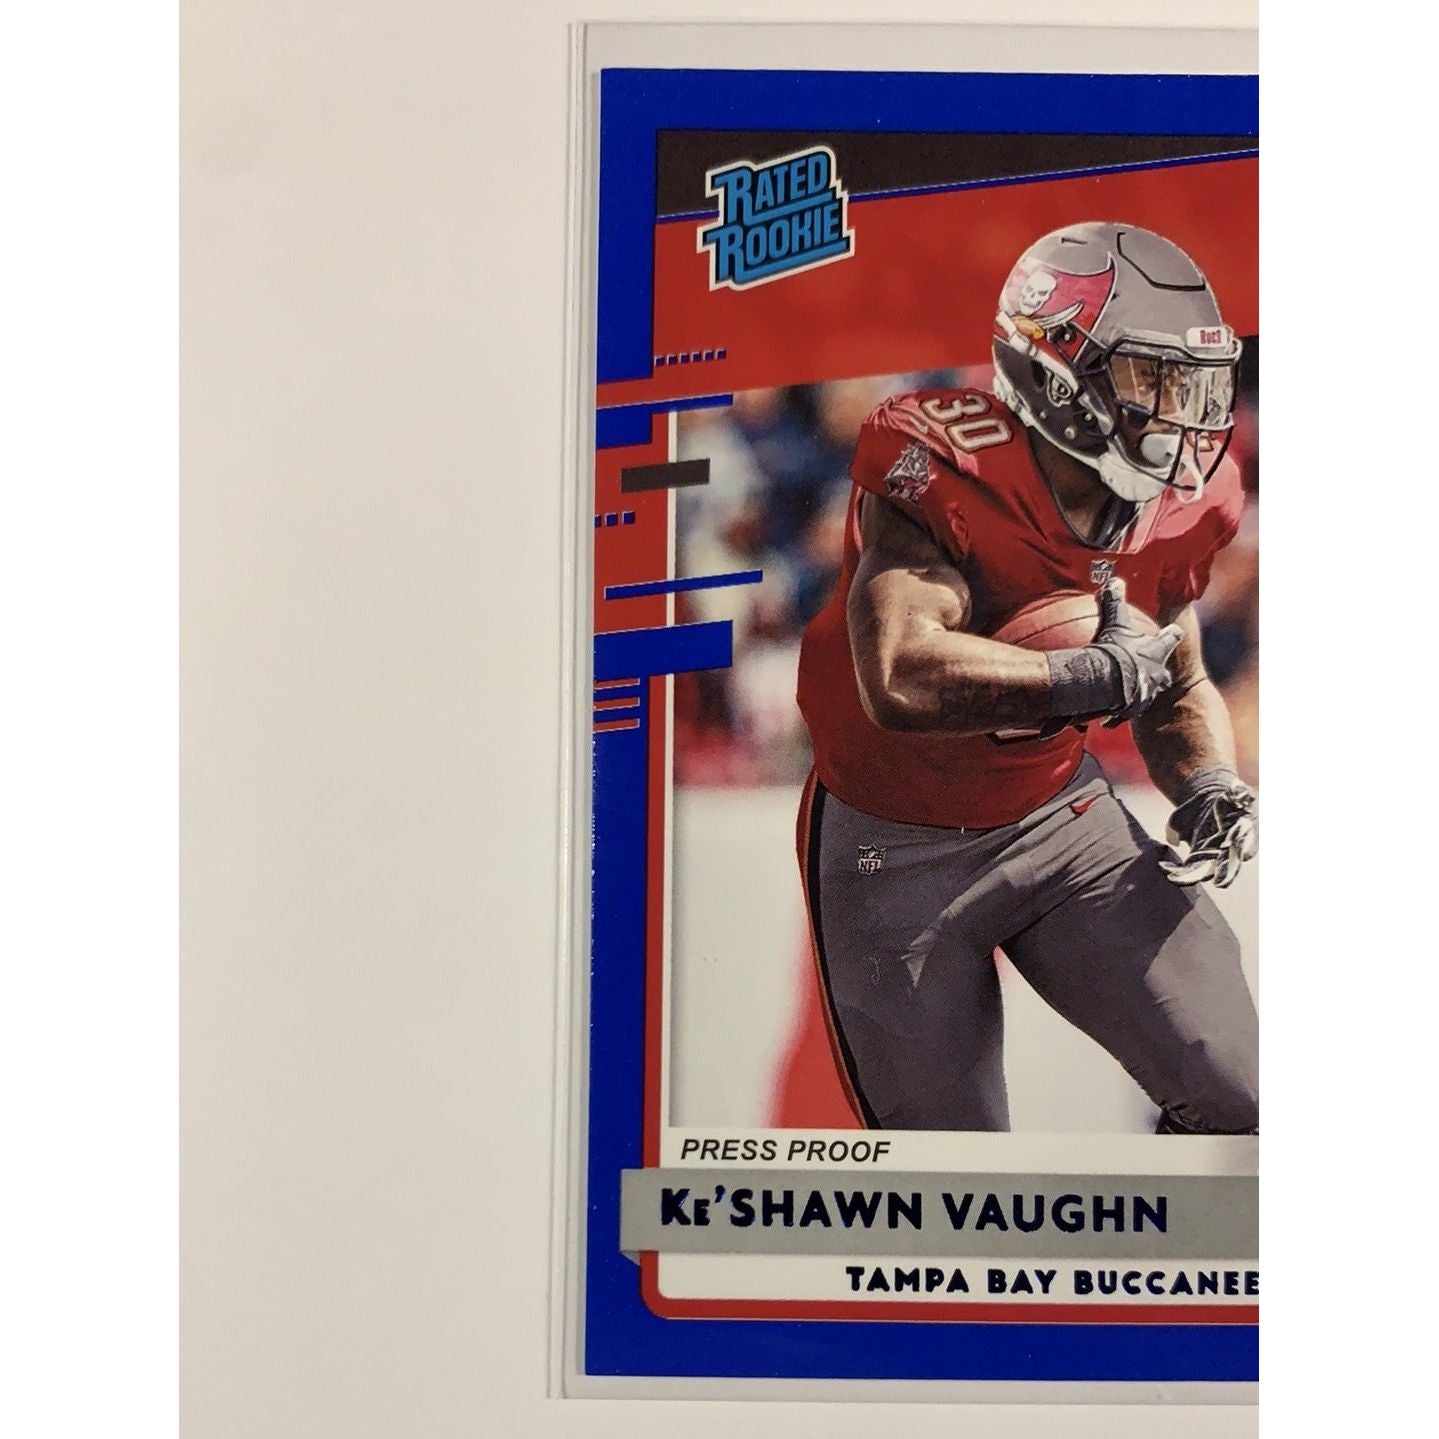  2020 Donruss Ke’Shawn Vaughn Blue Press Proof Rated Rookie  Local Legends Cards & Collectibles